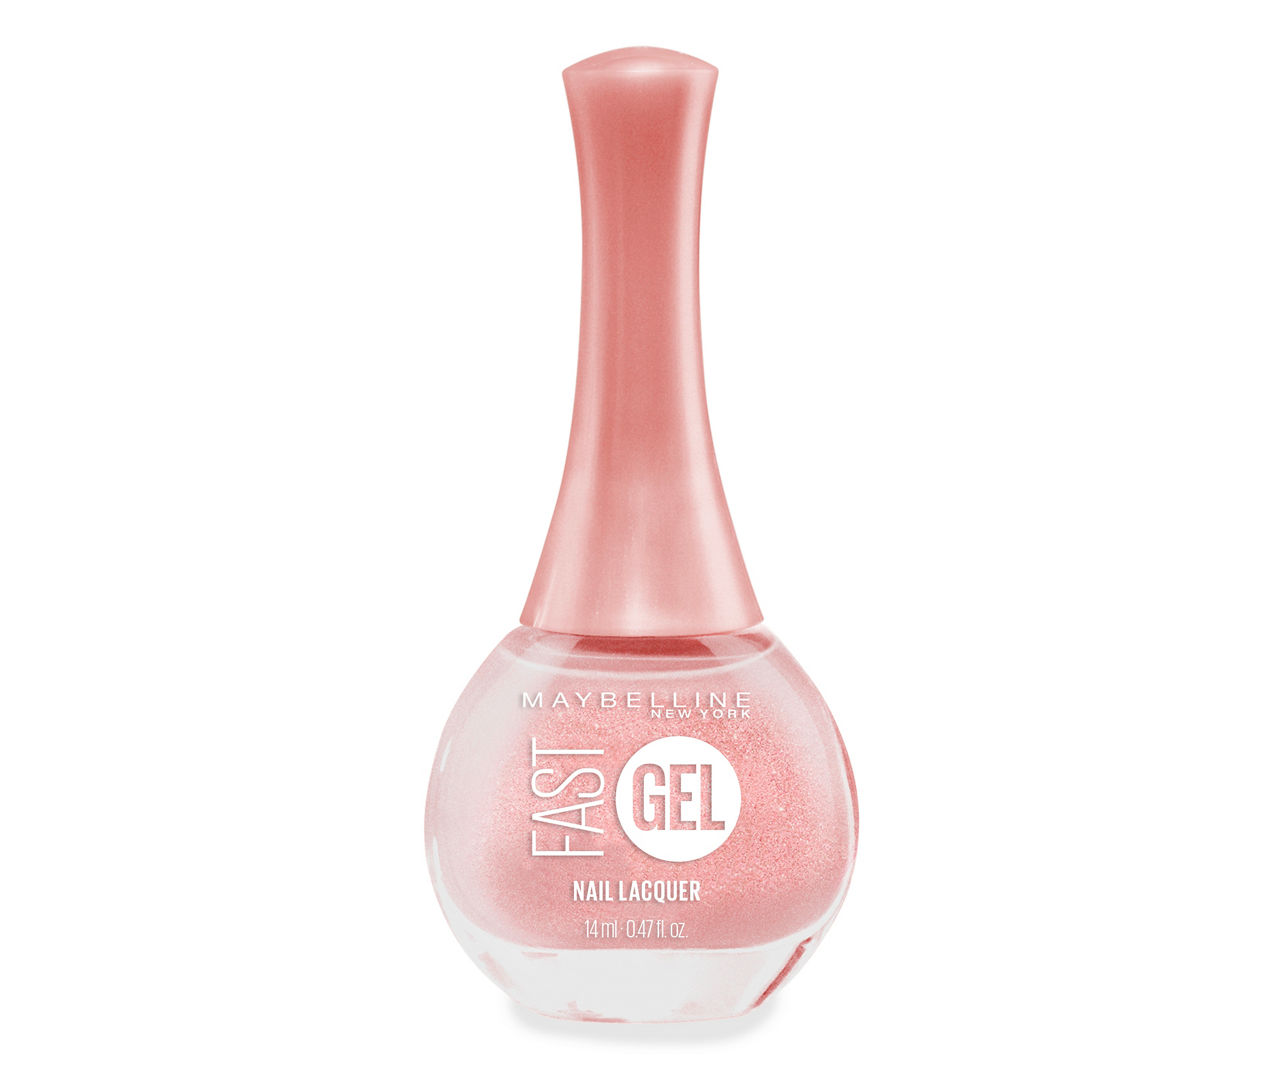 Big Gel Lots Oz. Nude Lacquer, | 0.47 Maybelline Flush Nail